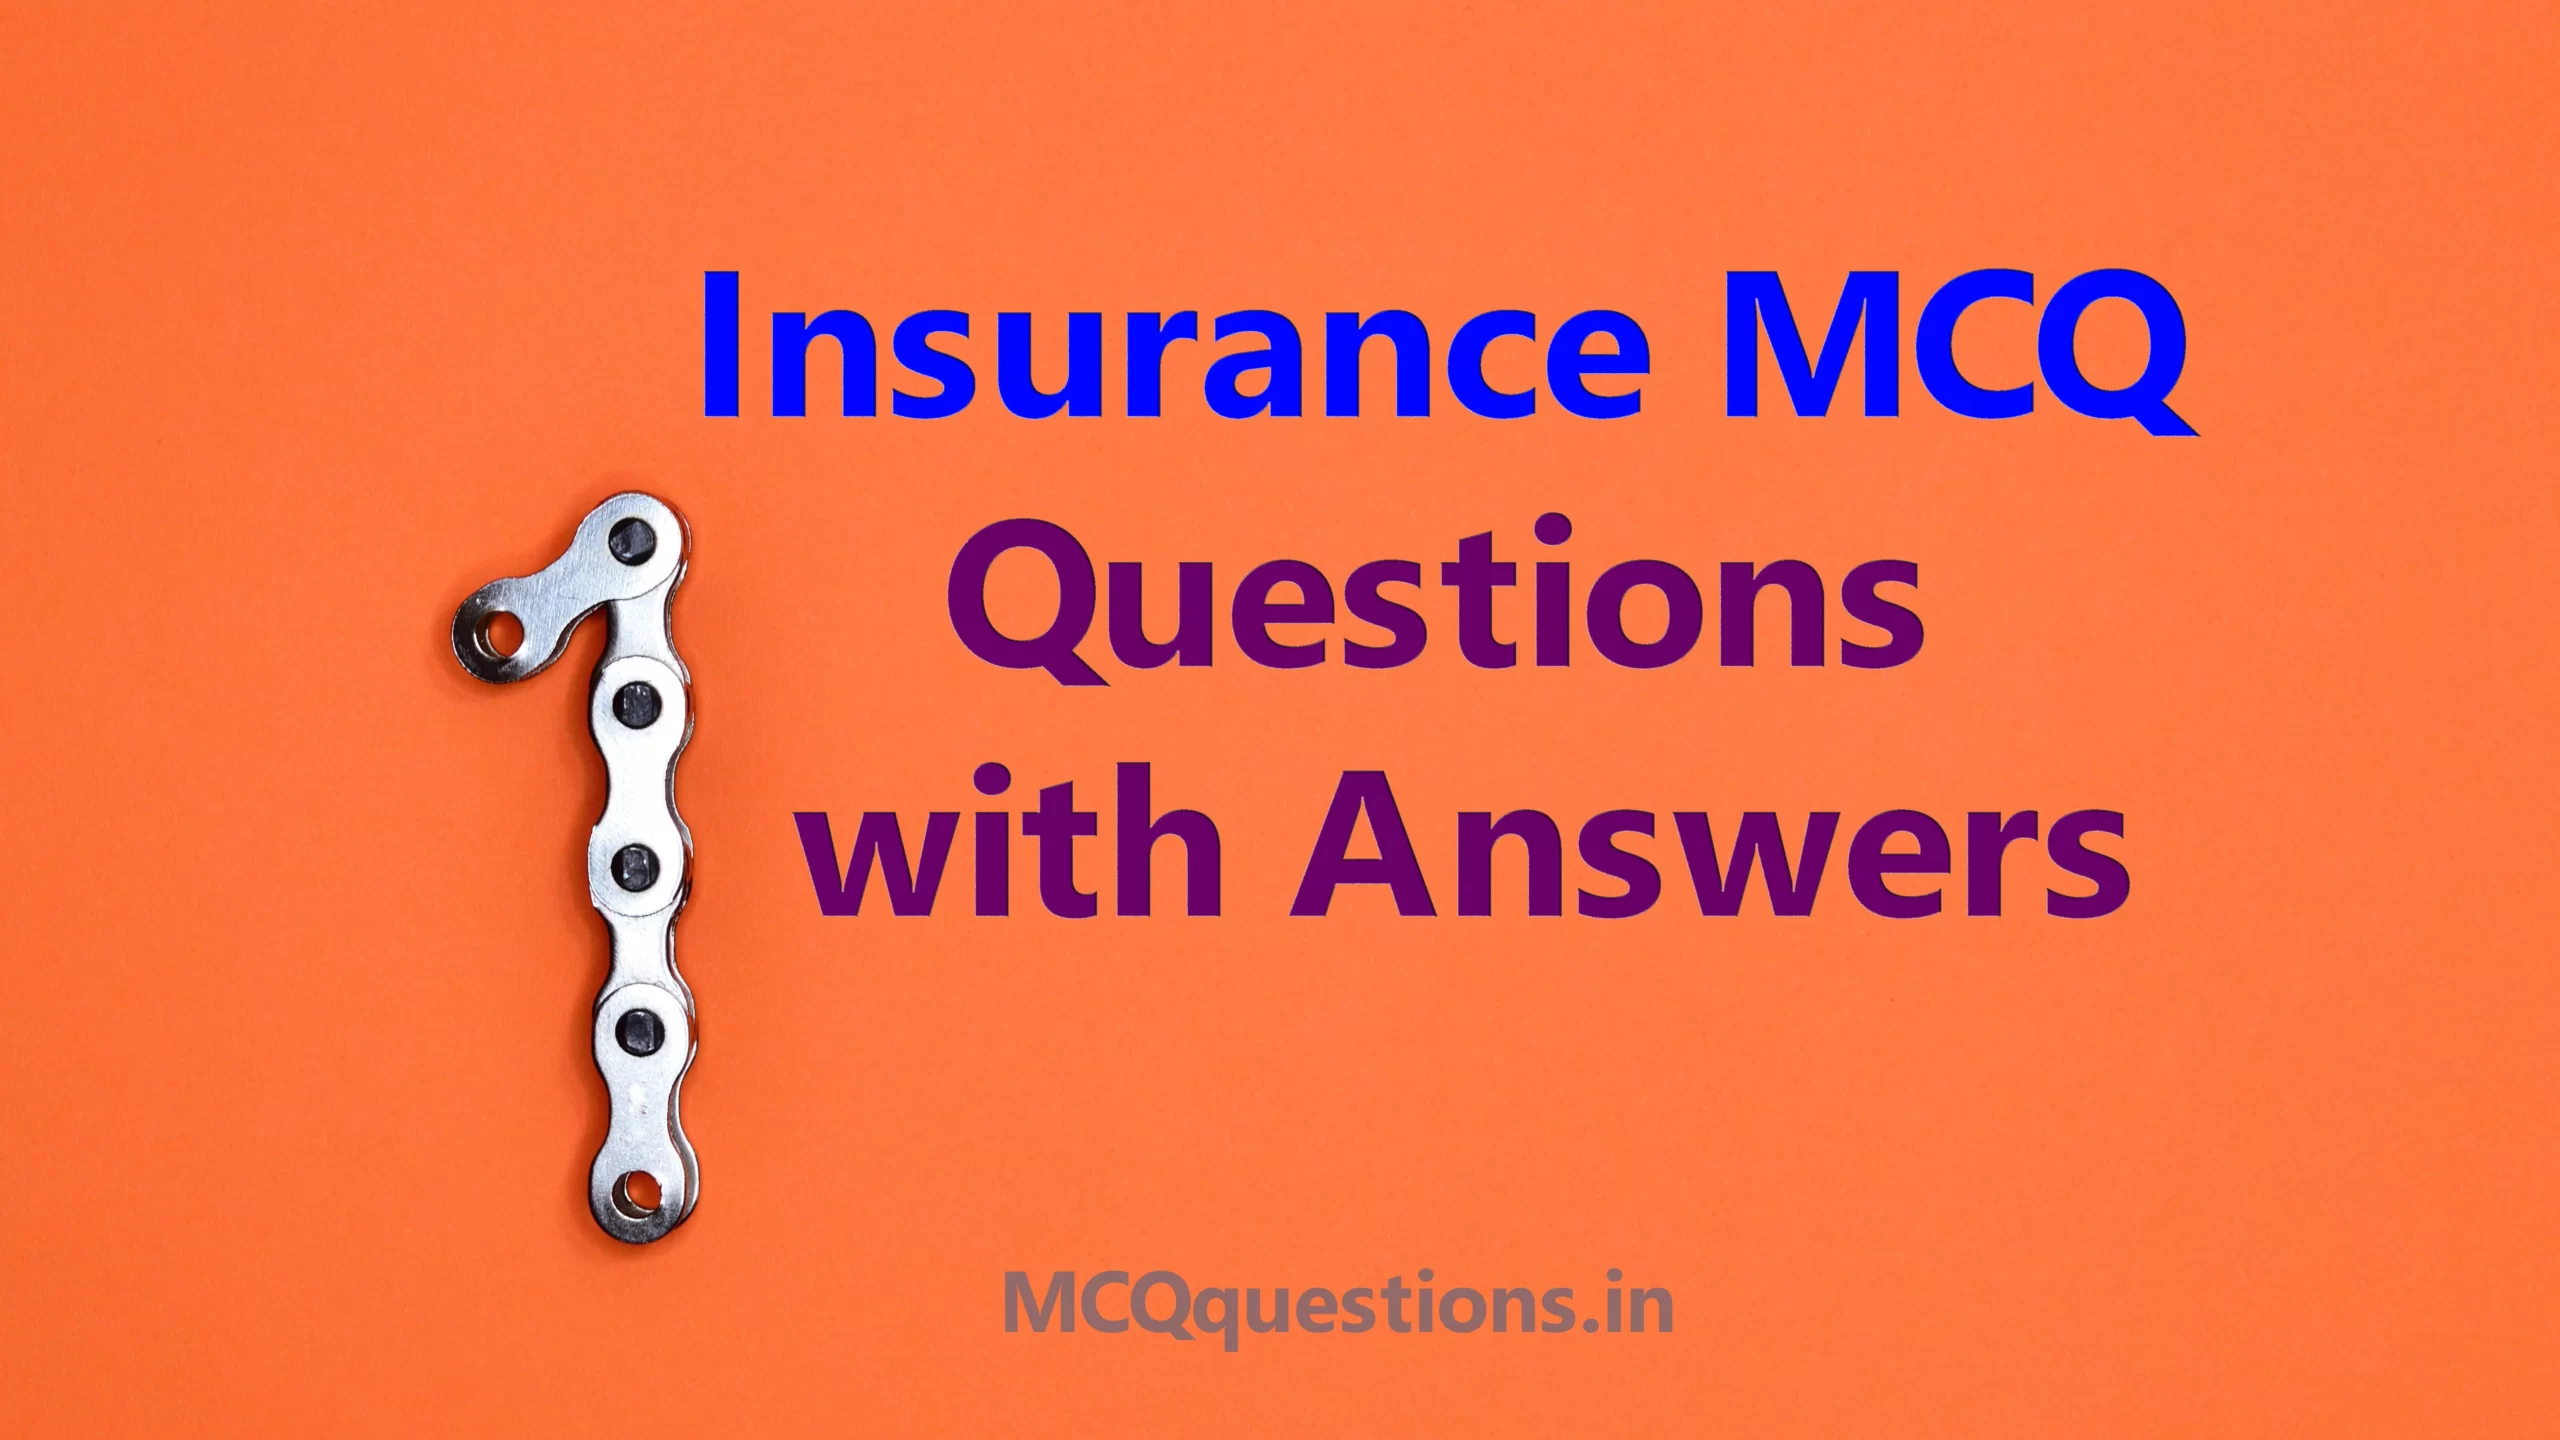 Insurance MCQ Questions with Answers